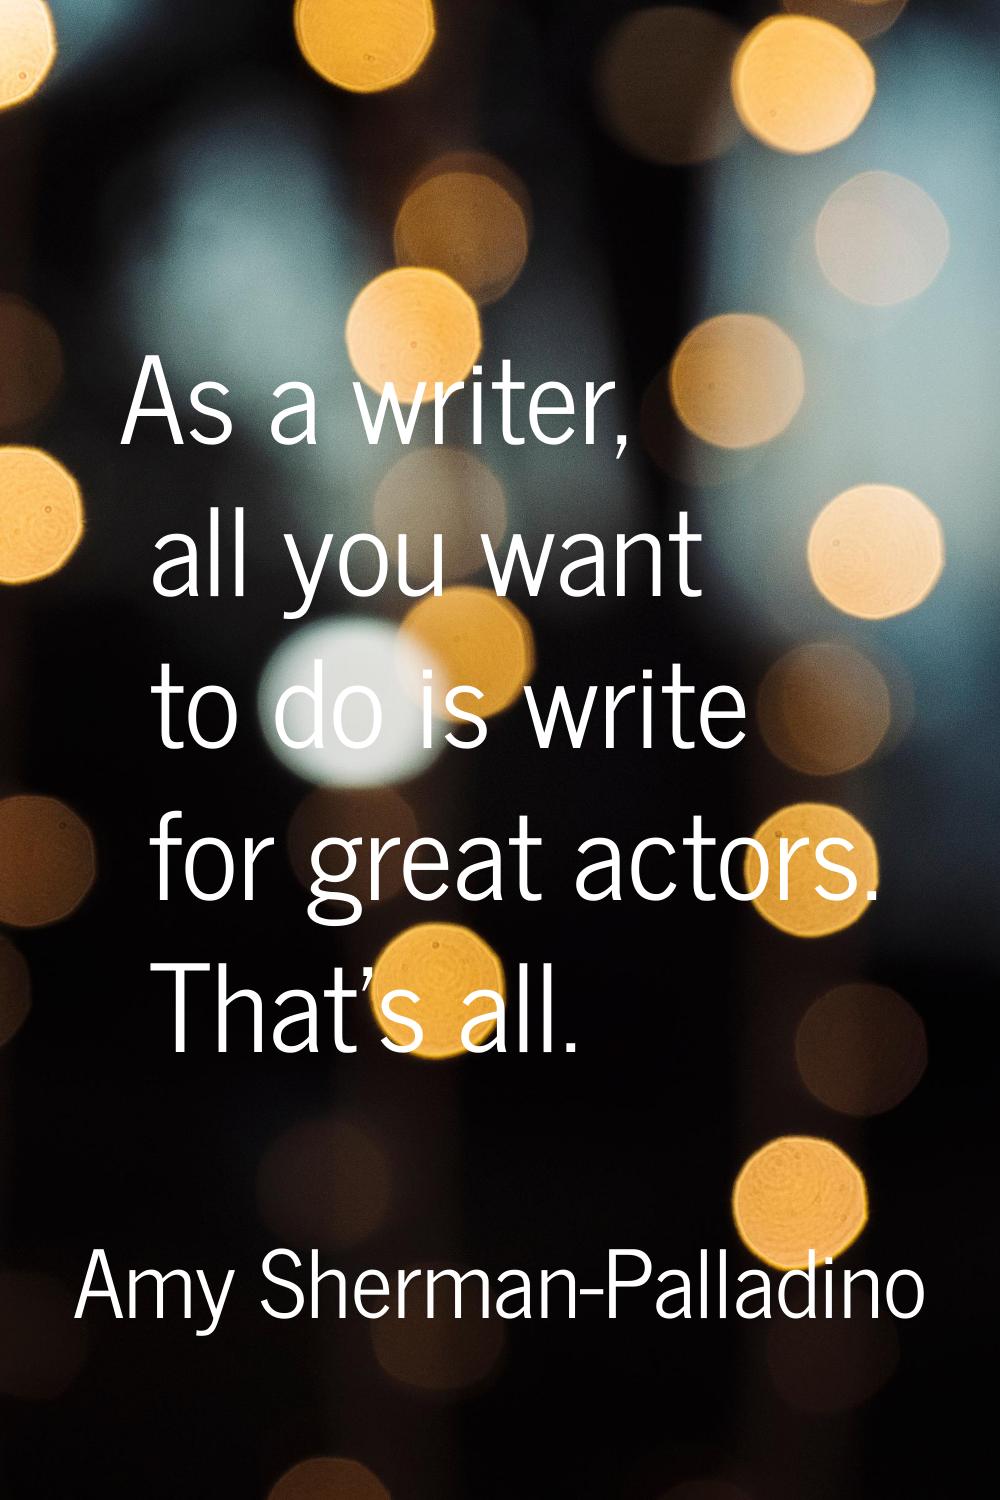 As a writer, all you want to do is write for great actors. That's all.